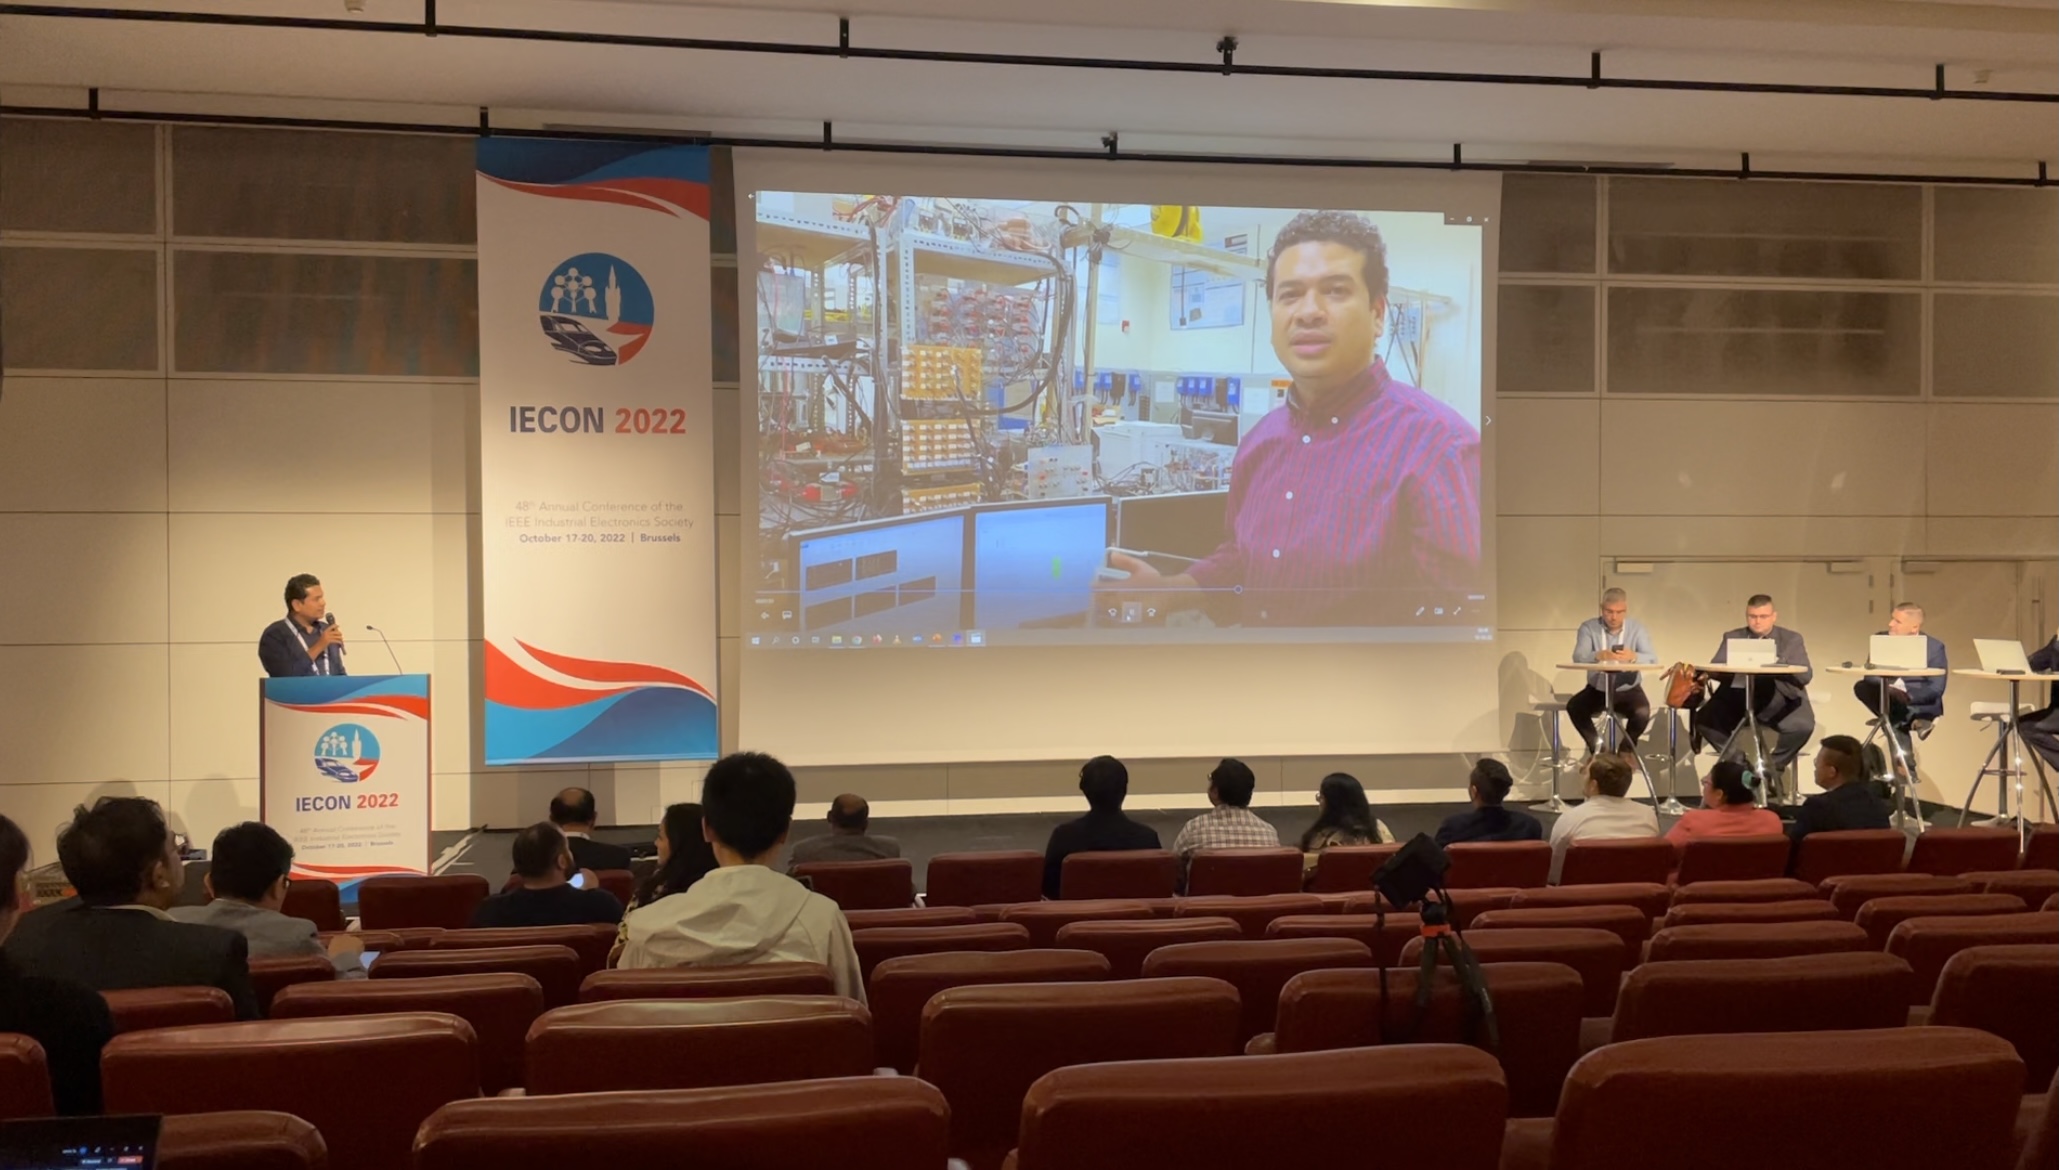 Ahmed Soliman represented ESRL, FIU, at the IEEE IECON 2022, Brussels, Belgium